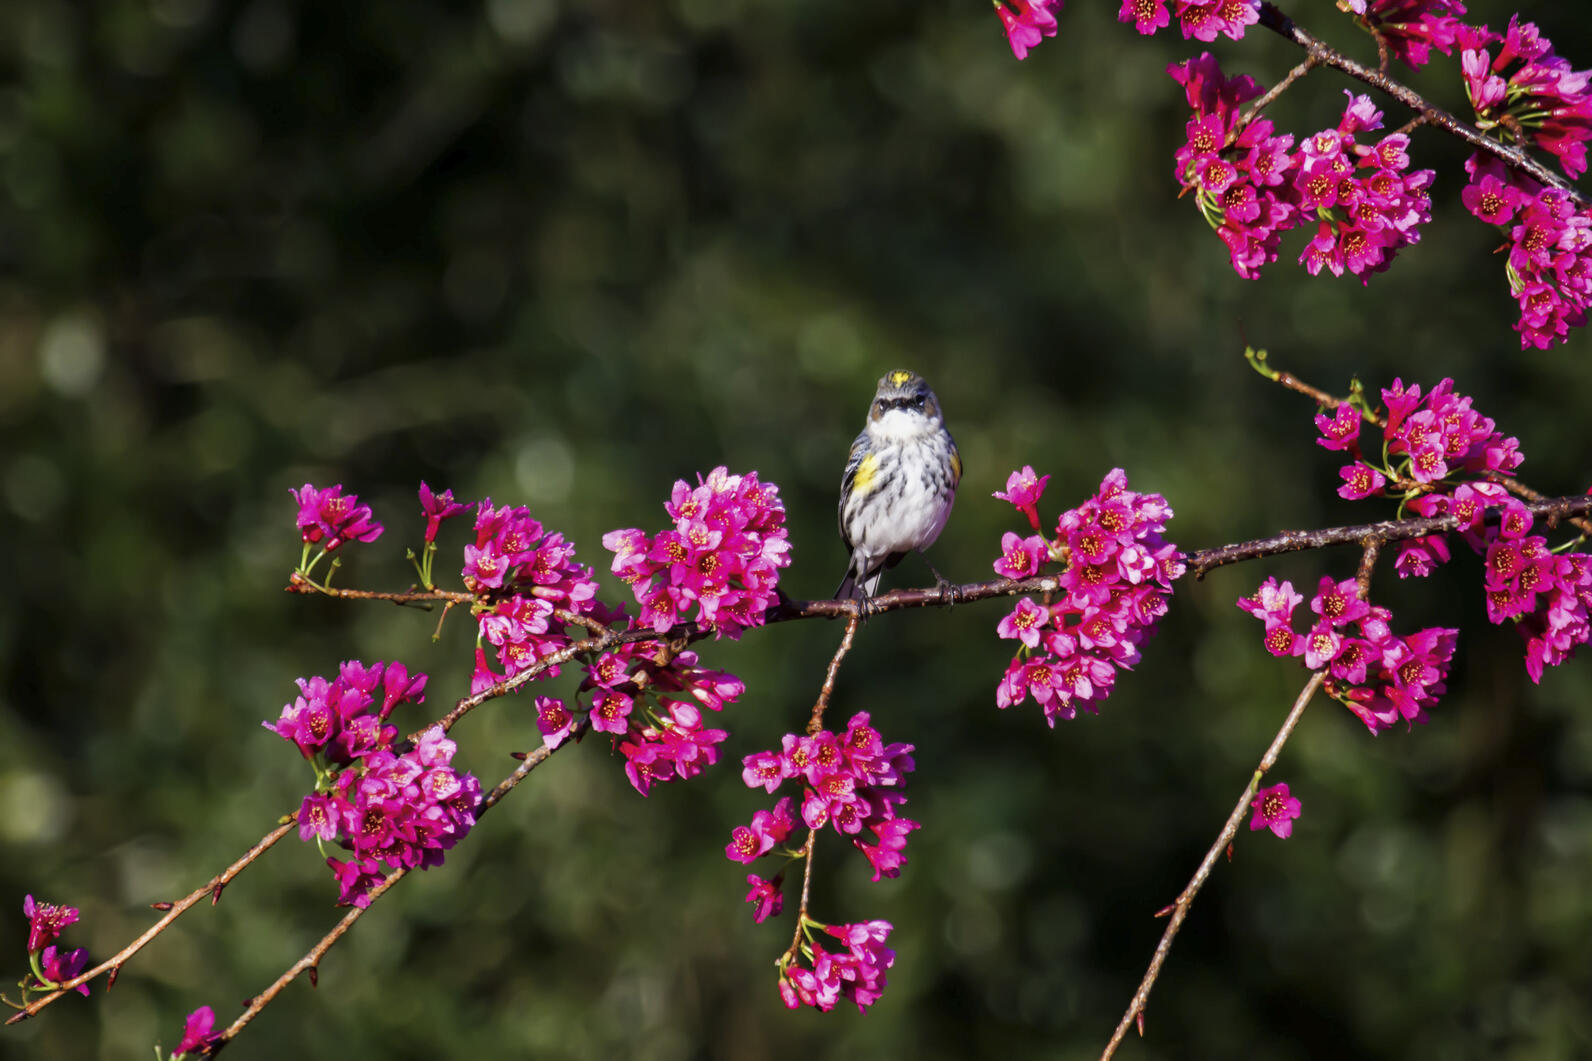 A yellow rumped warbler sitting in a tree with many flowers blooming